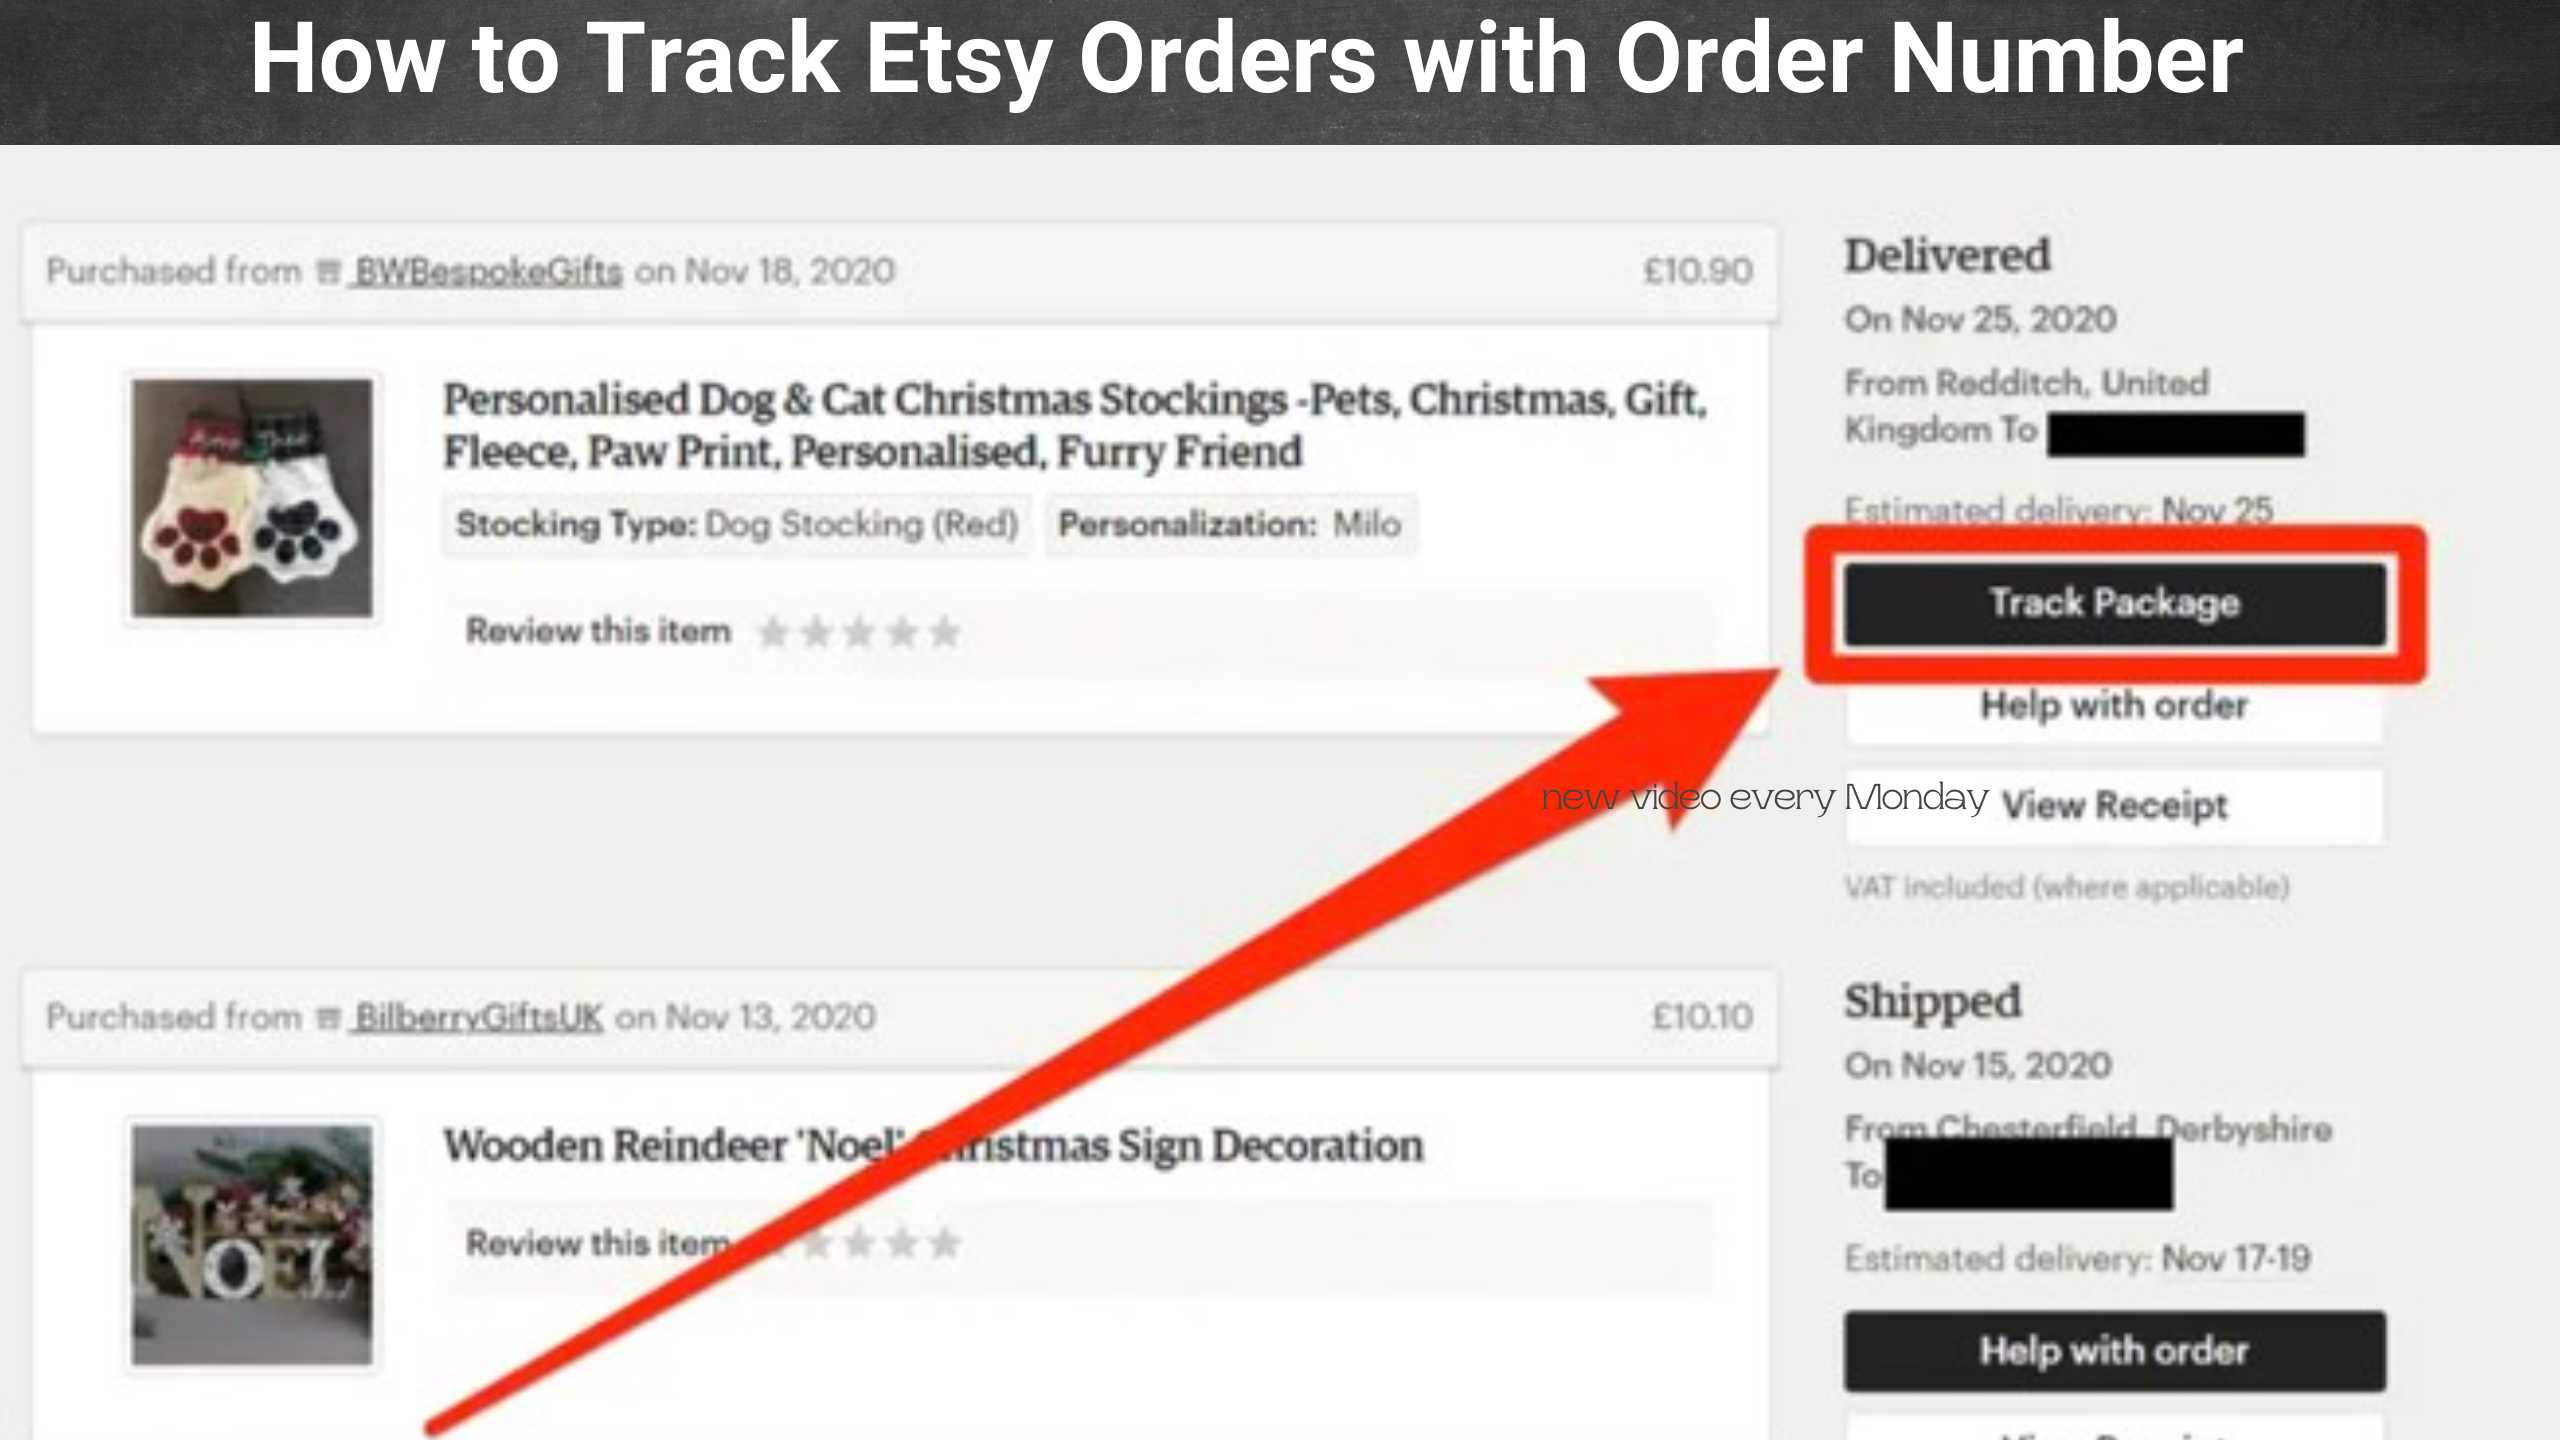 How to Track Etsy Orders with Order Number